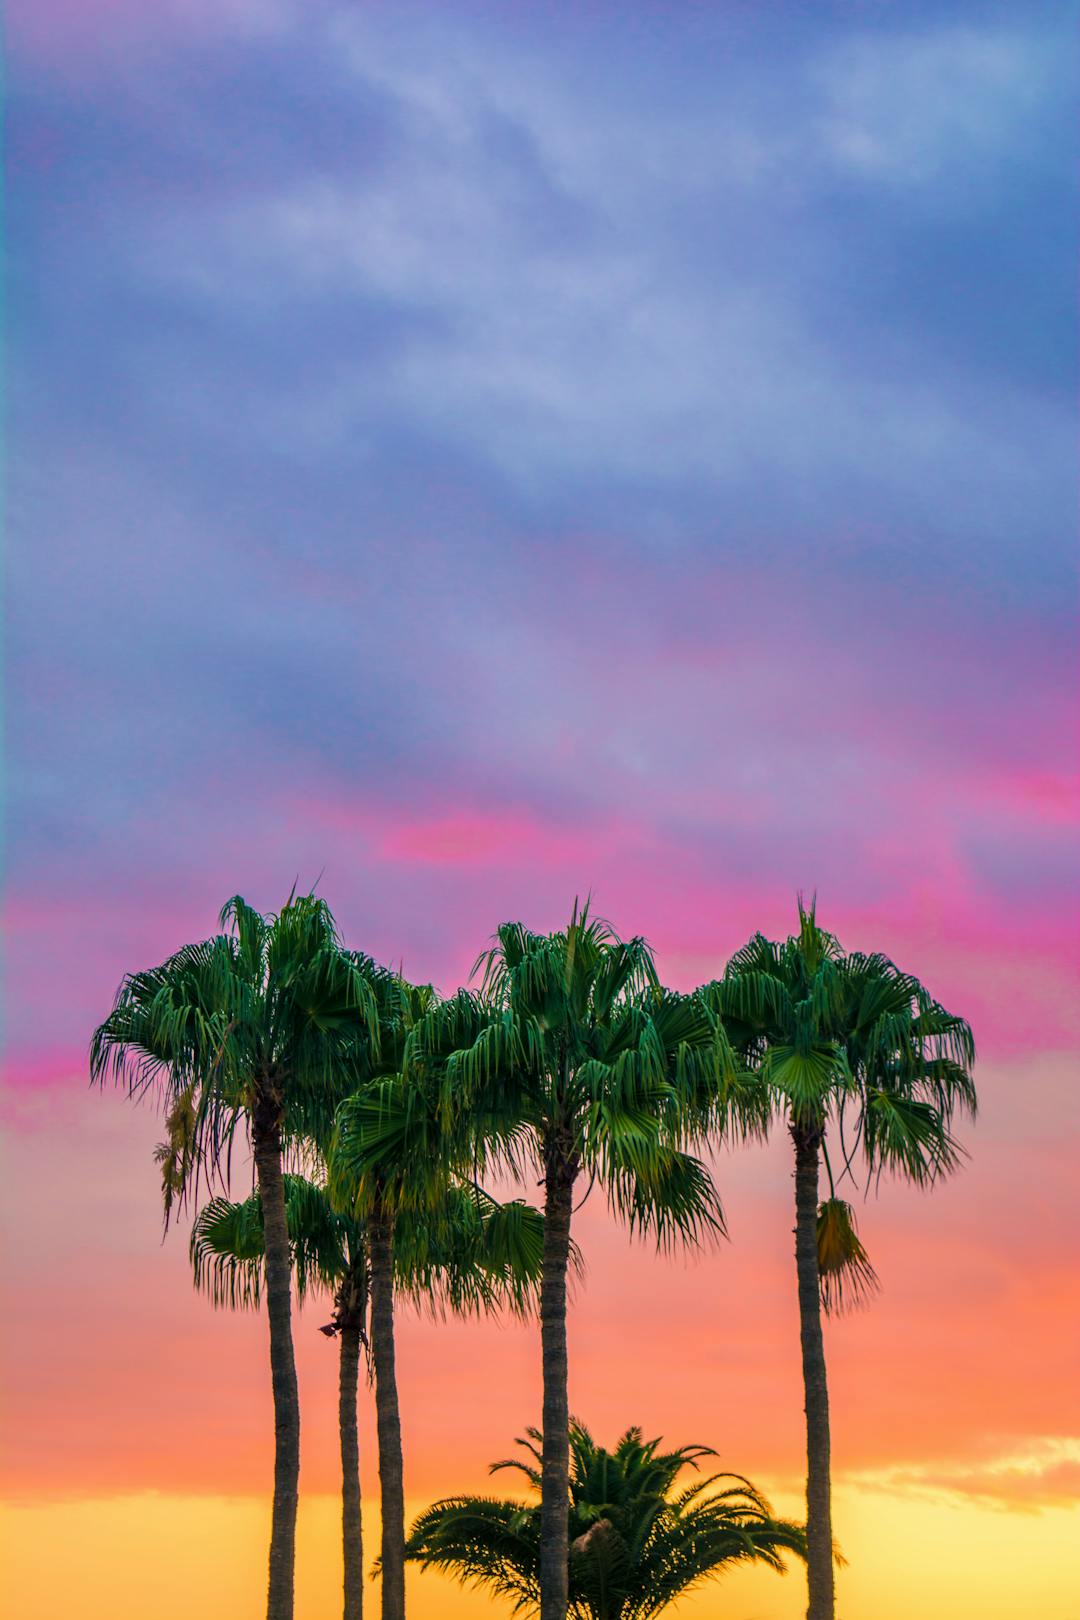 A group of palm trees standing next to each other